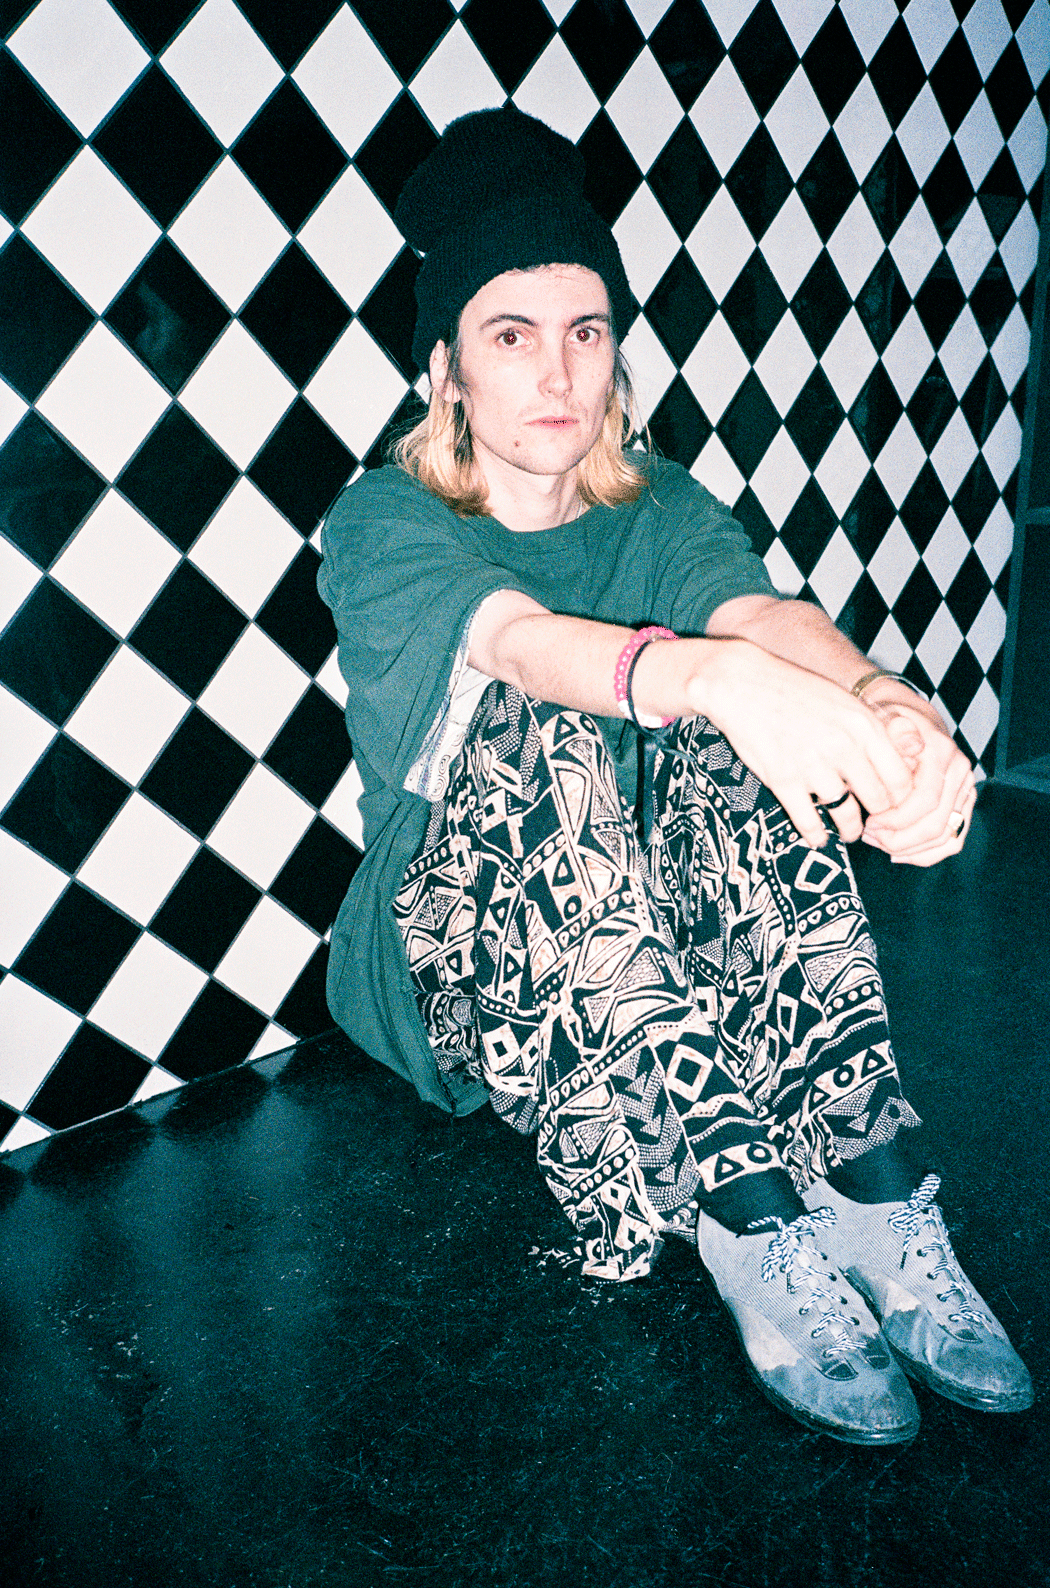 zachary cole smith diiv band pairsproject